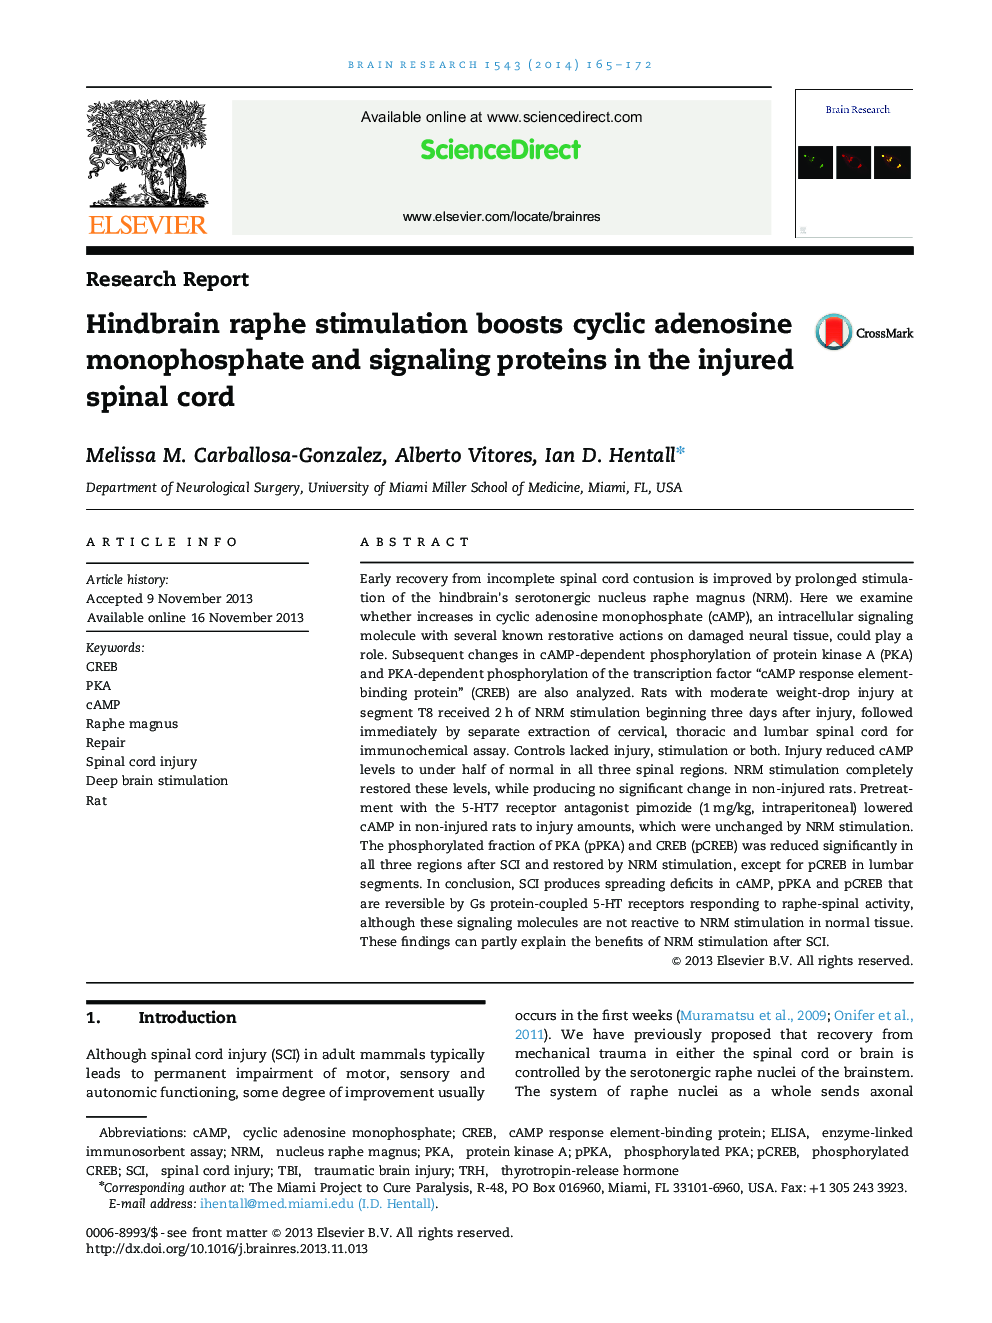 Research ReportHindbrain raphe stimulation boosts cyclic adenosine monophosphate and signaling proteins in the injured spinal cord